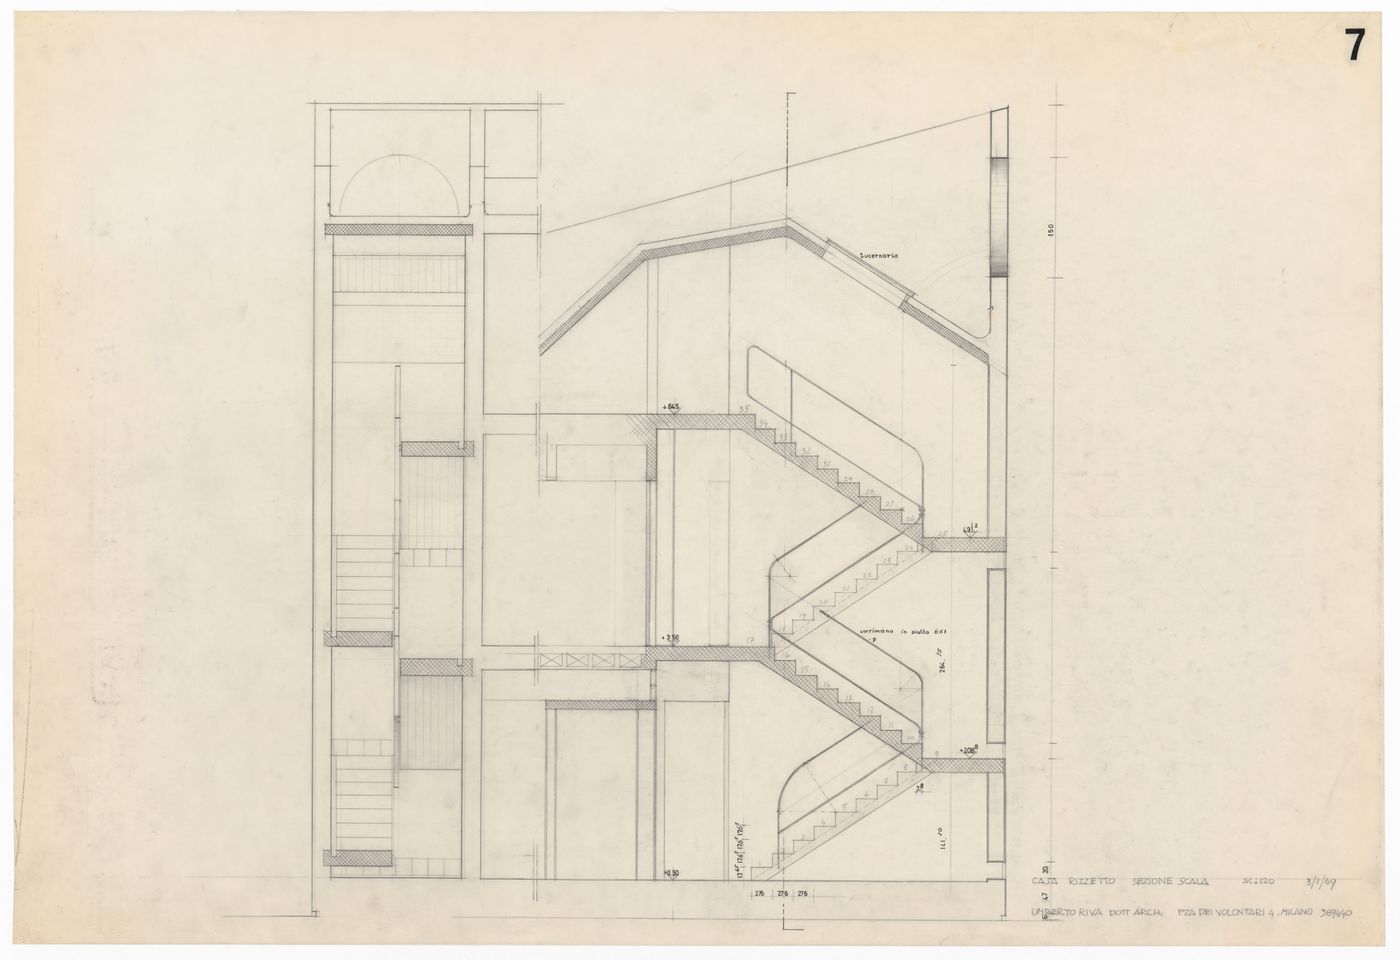 Section for Casa Rizzetto, Caorle, Italy